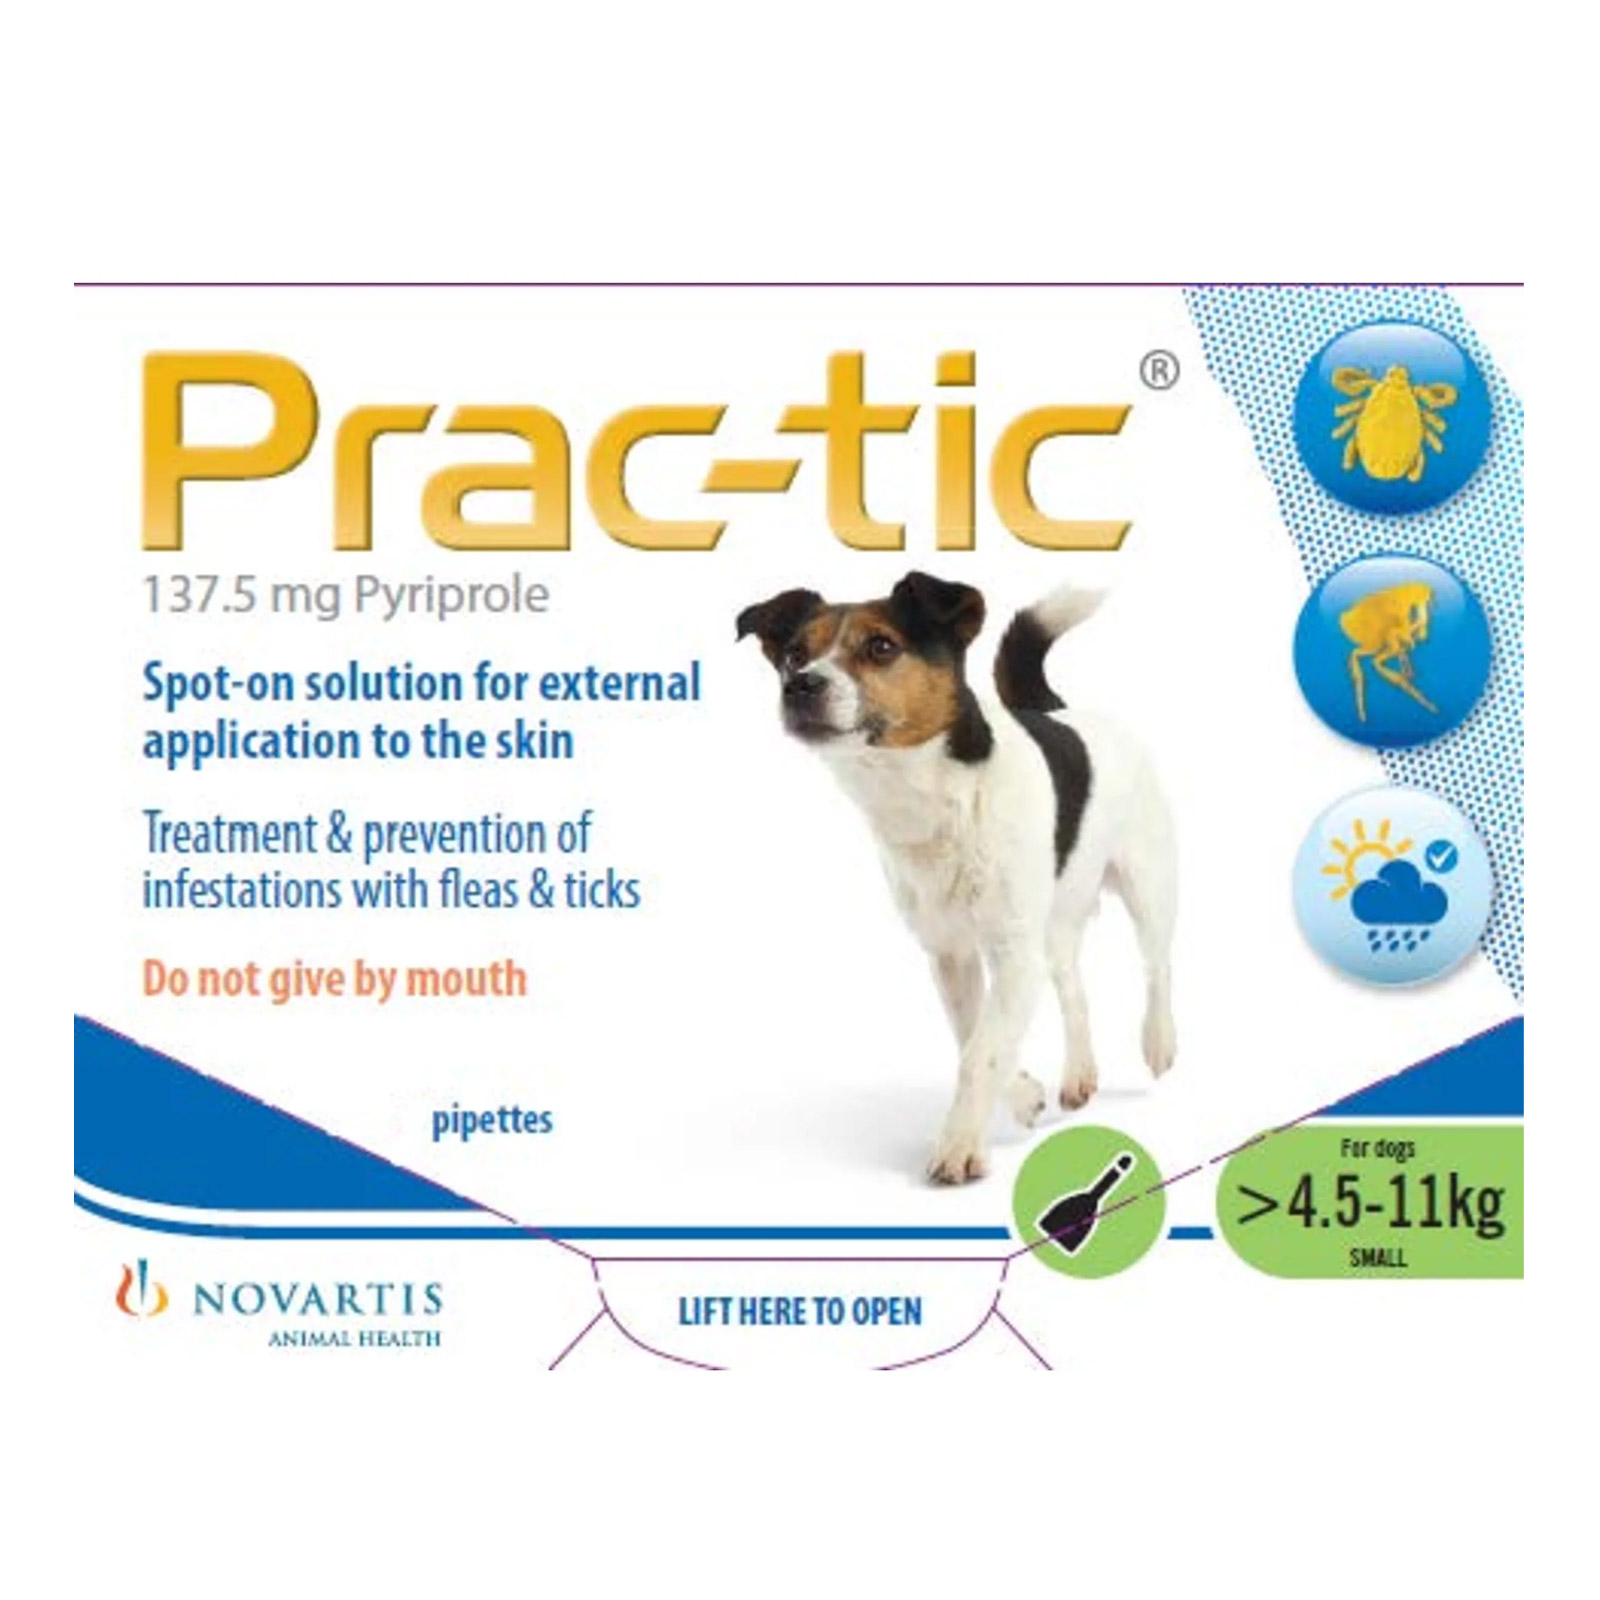 Prac-Tic Flea Spot On solution is ideal treatment and prevention of infestations of fleas and tickets in dogs. Buy Prac-tick flea solutions for Dogs as an ideal treatment and prevention of infestations of fleas and tickets in dogs.